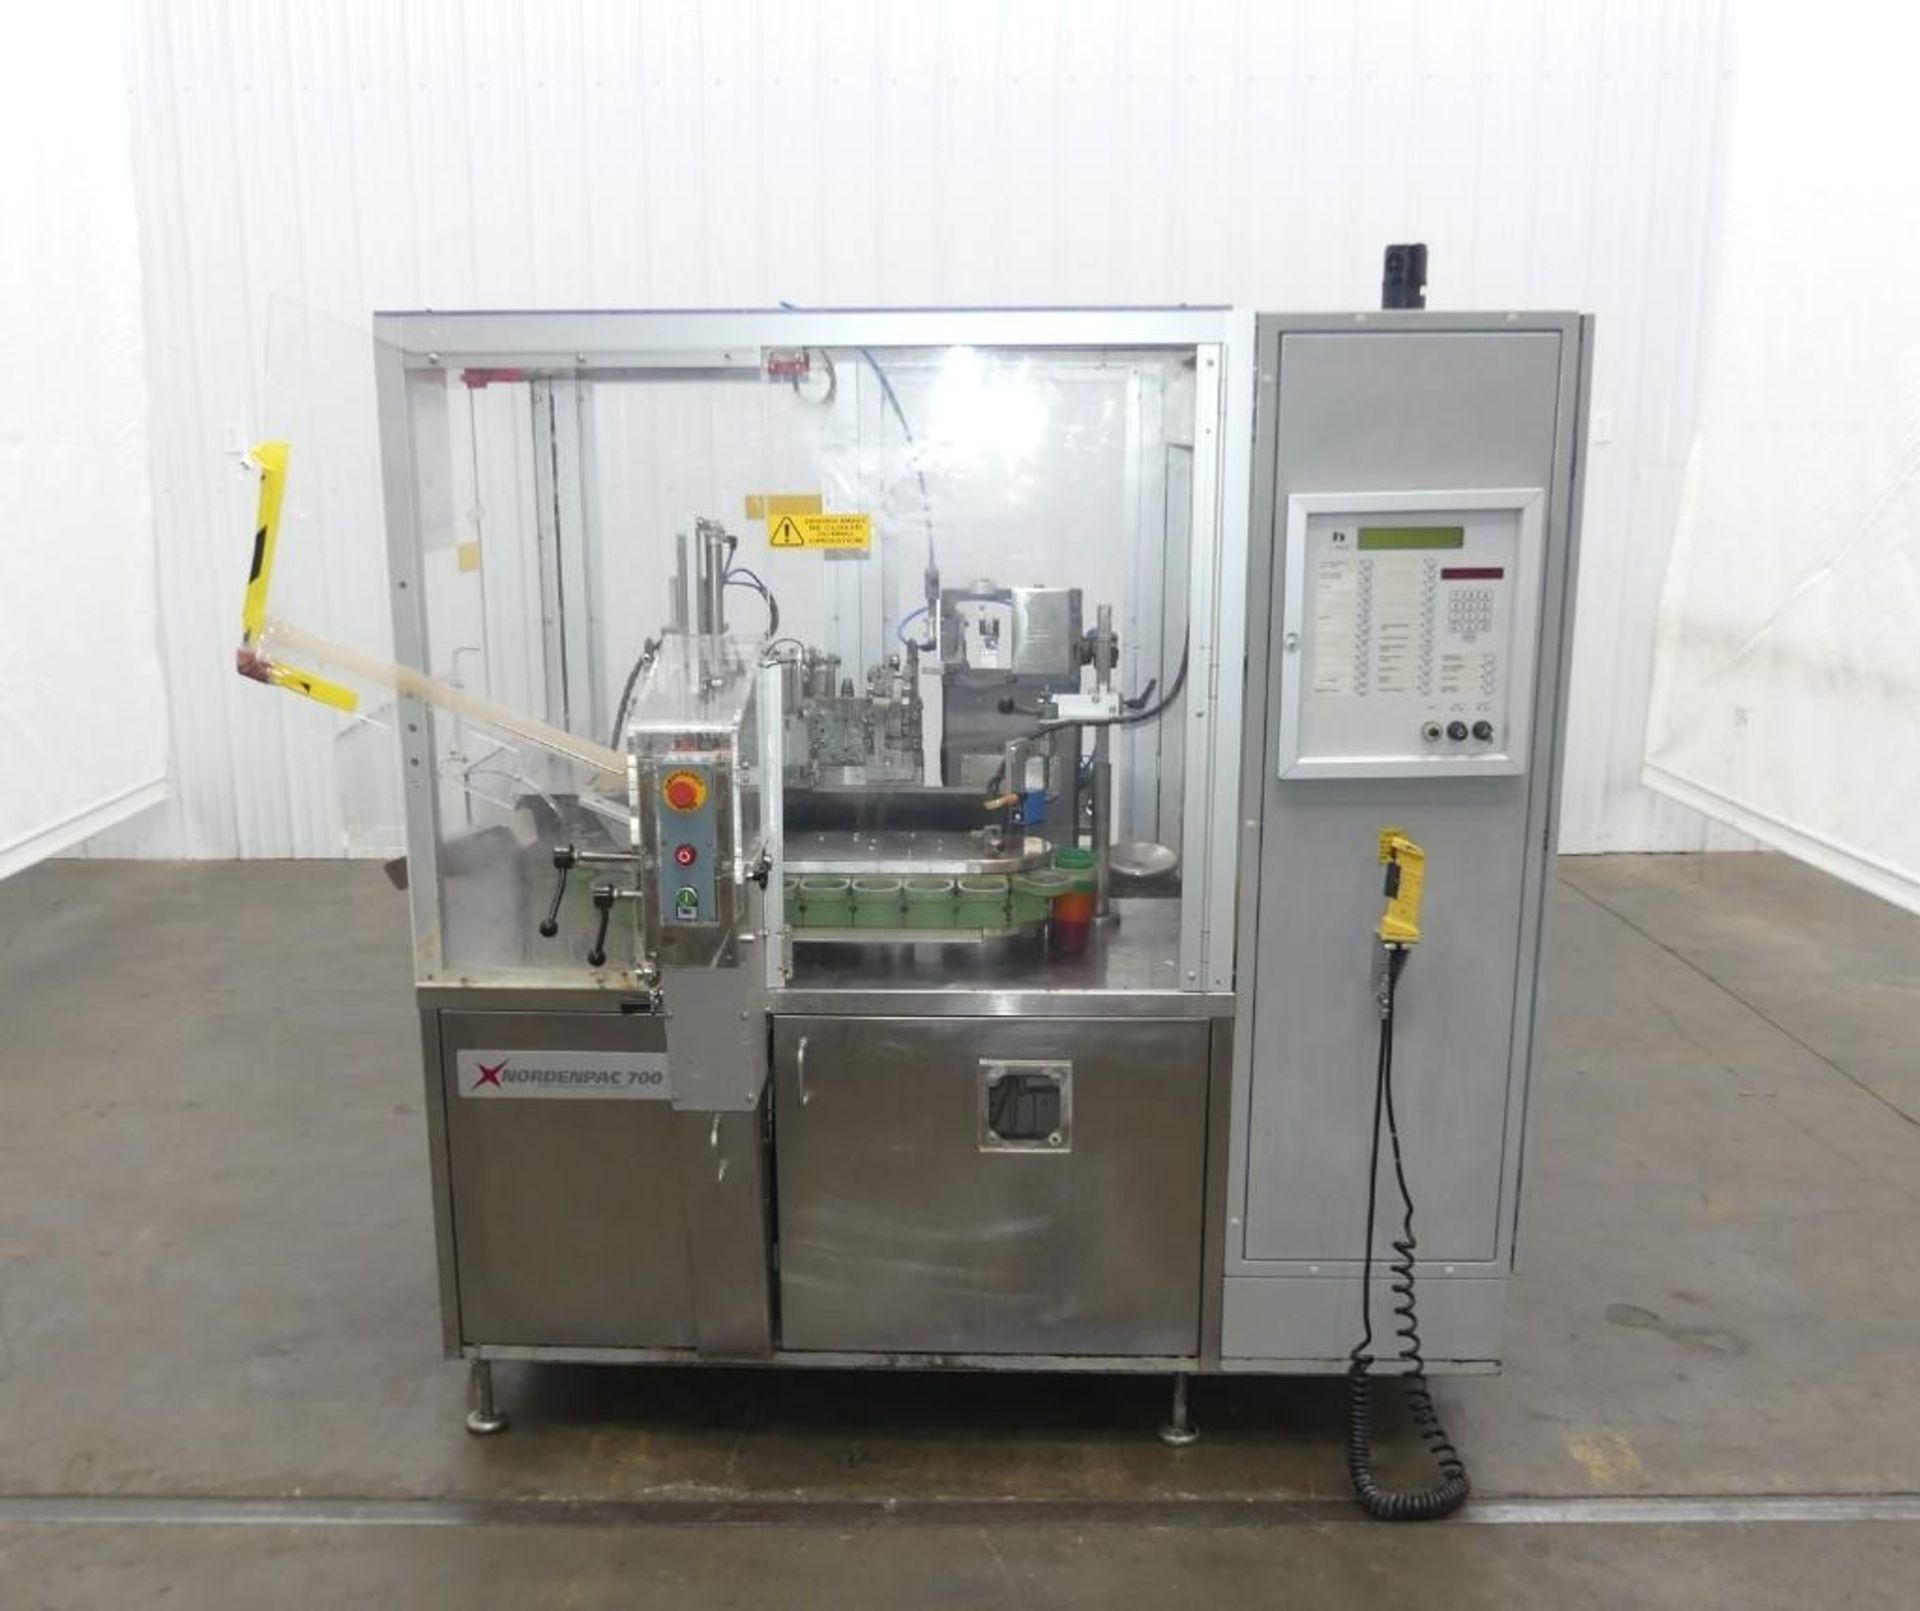 Nordenpac 700 Automatic Tube Filler and Sealer